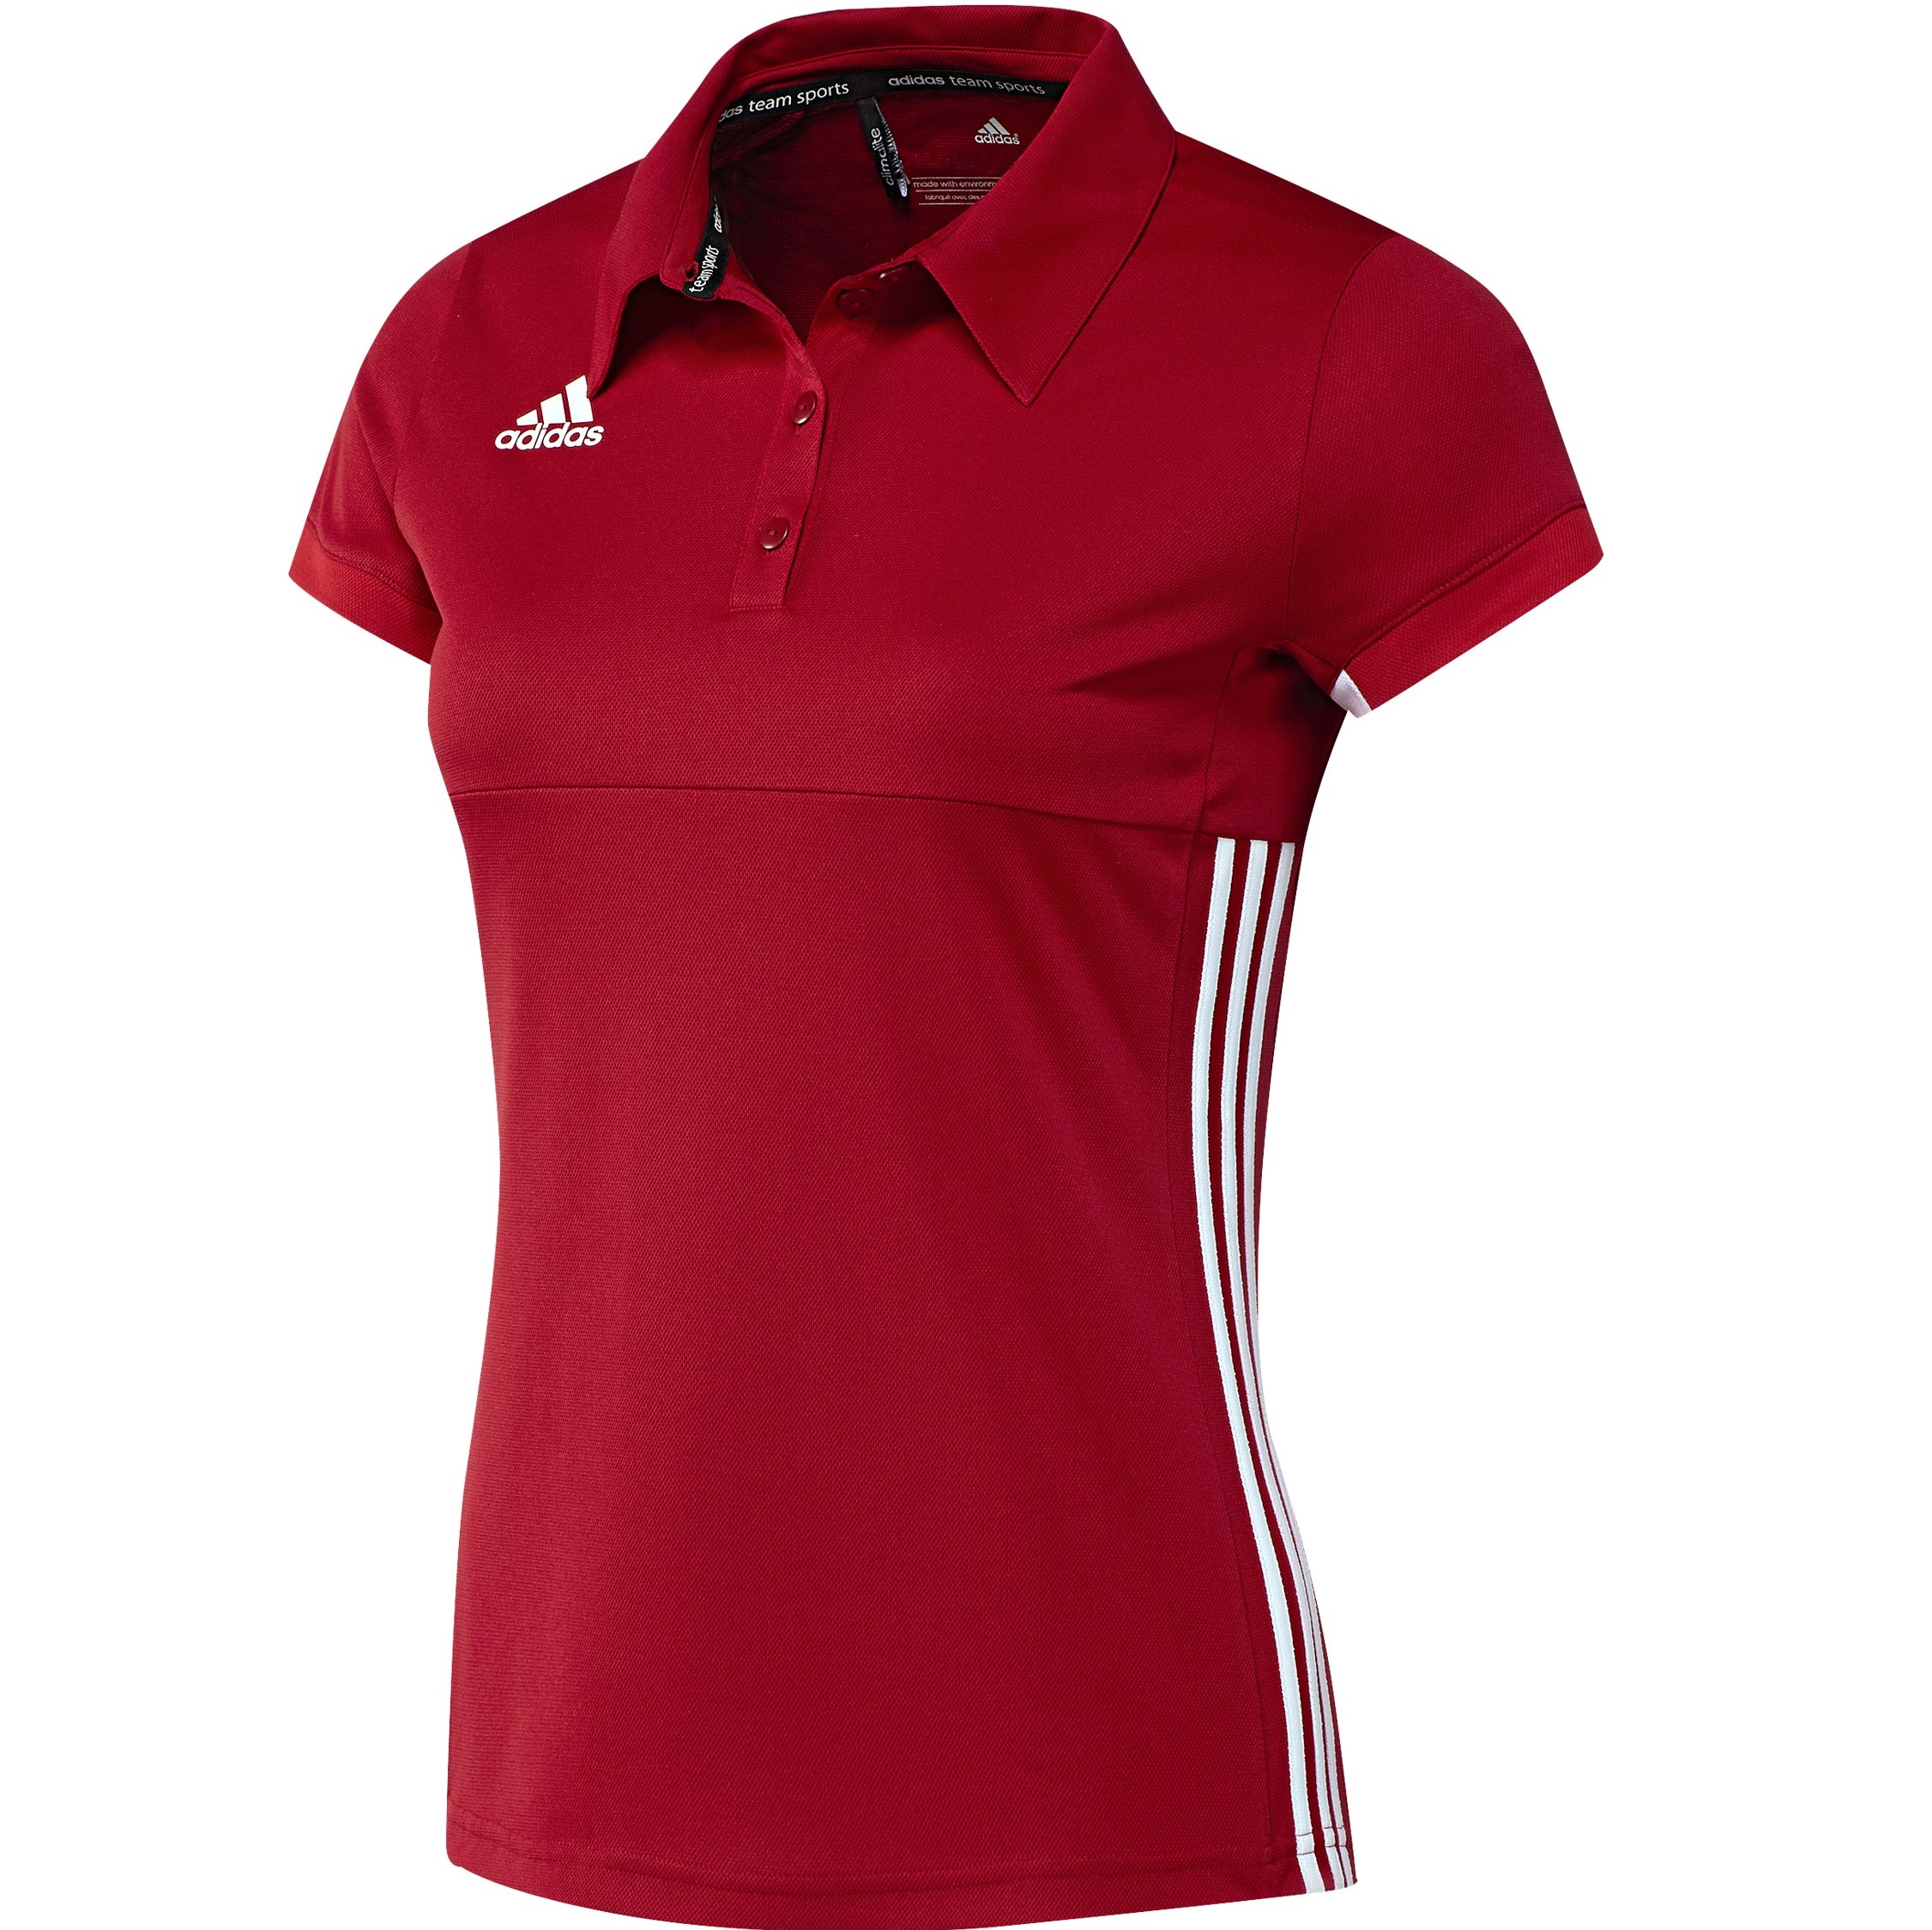 Adidas Women's Red Polo Top